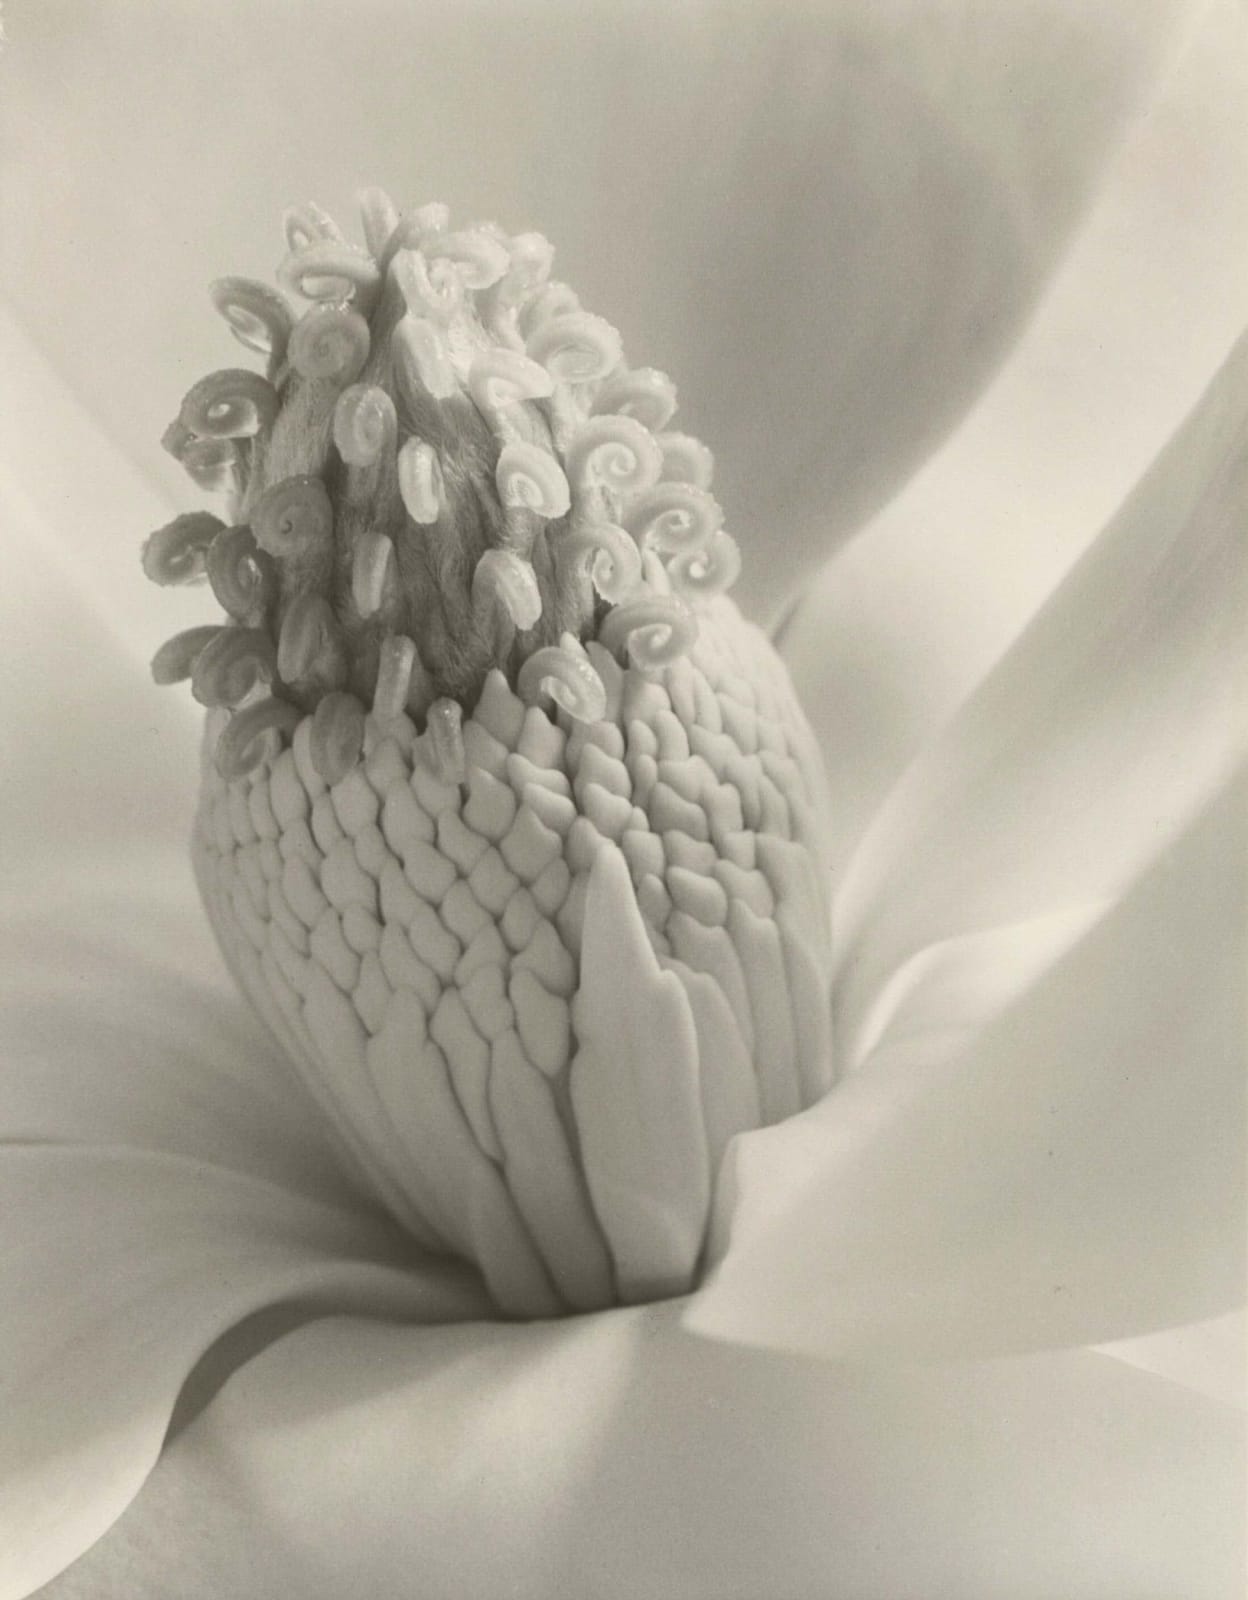 Imogen Cunningham Magnolia Blossom (Tower of Jewels), 1925 close up of inside of magnolia flower